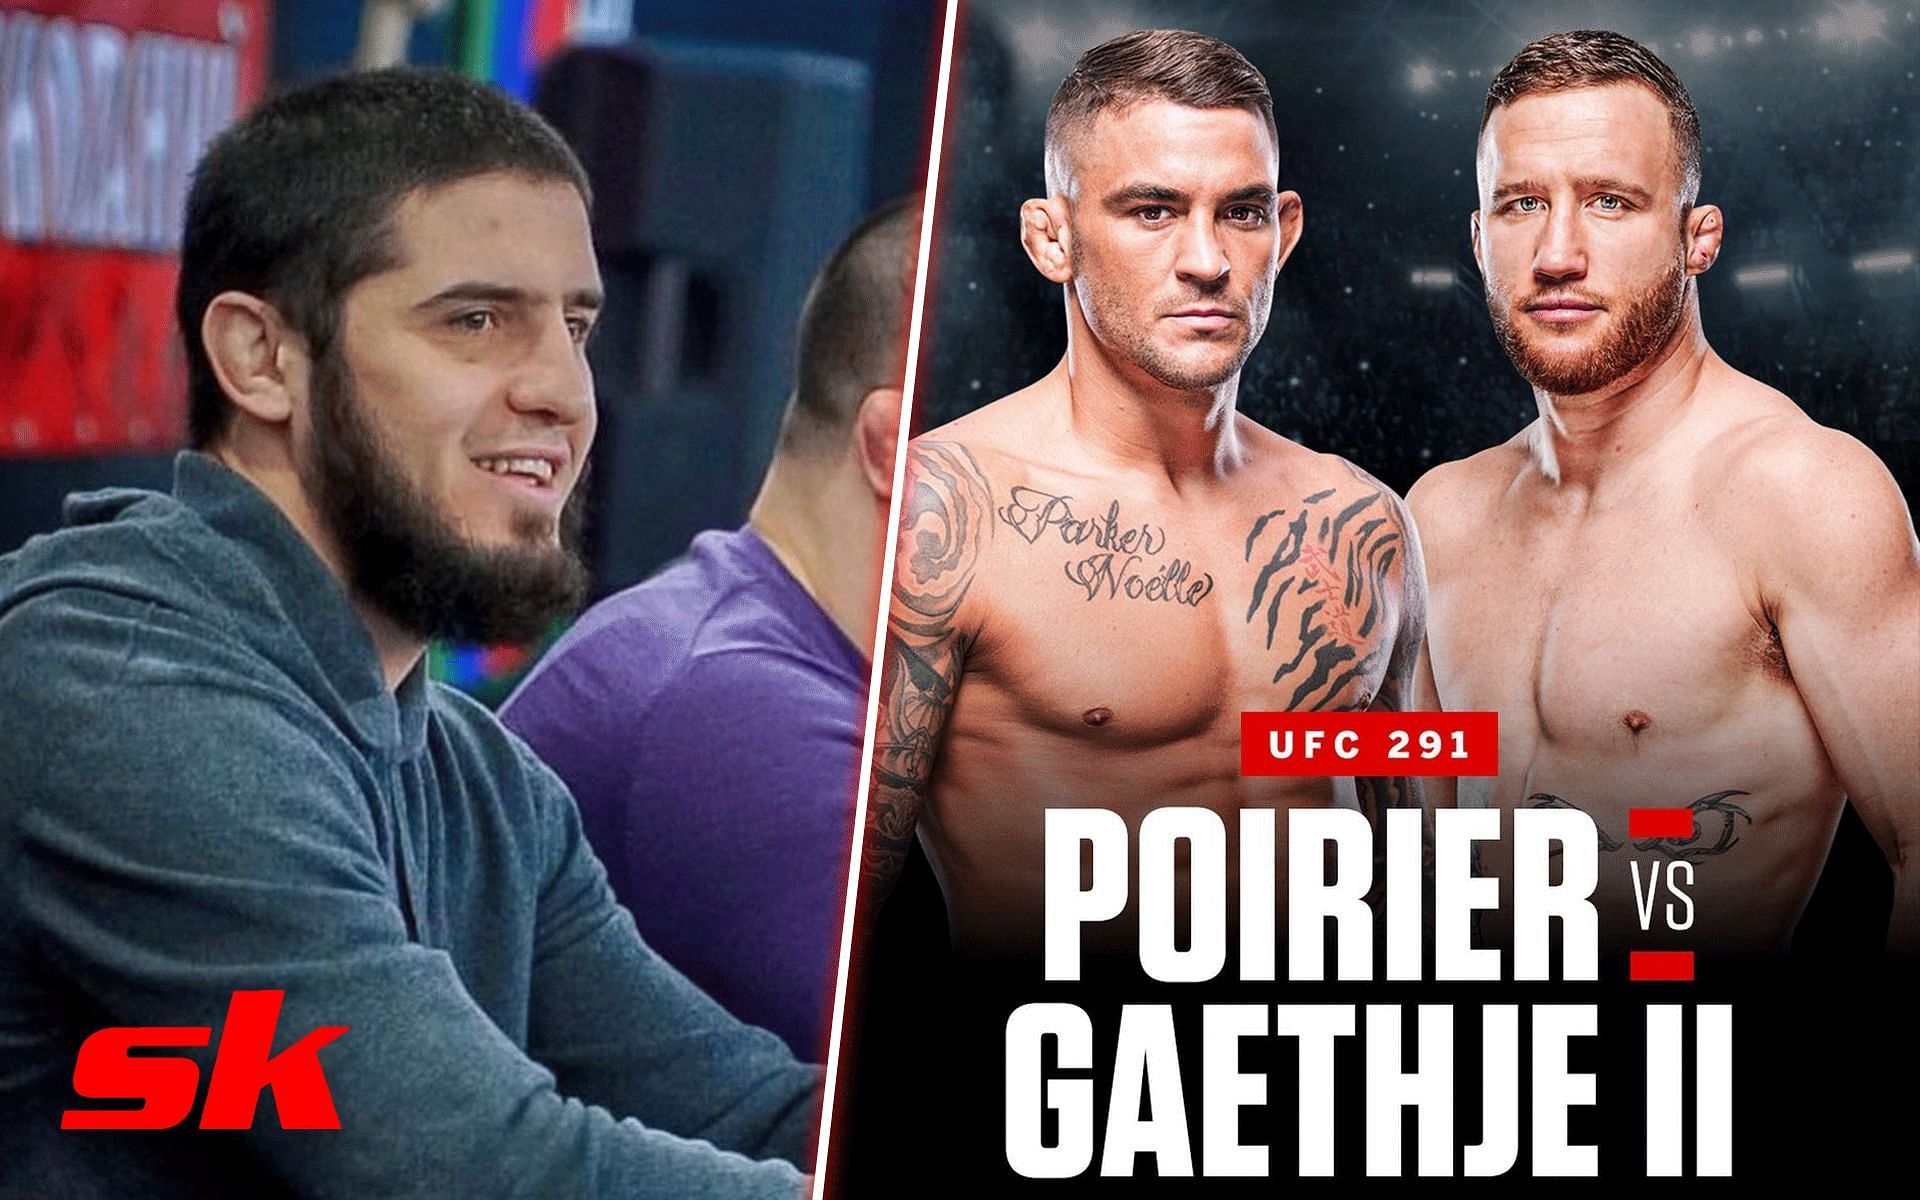 Islam Makhachev (left) and Dustin Poirier vs. Justin Gaethje at UFC 291 (right) [Image credits: @islam_makhachev and @espnmma on Instagram] 